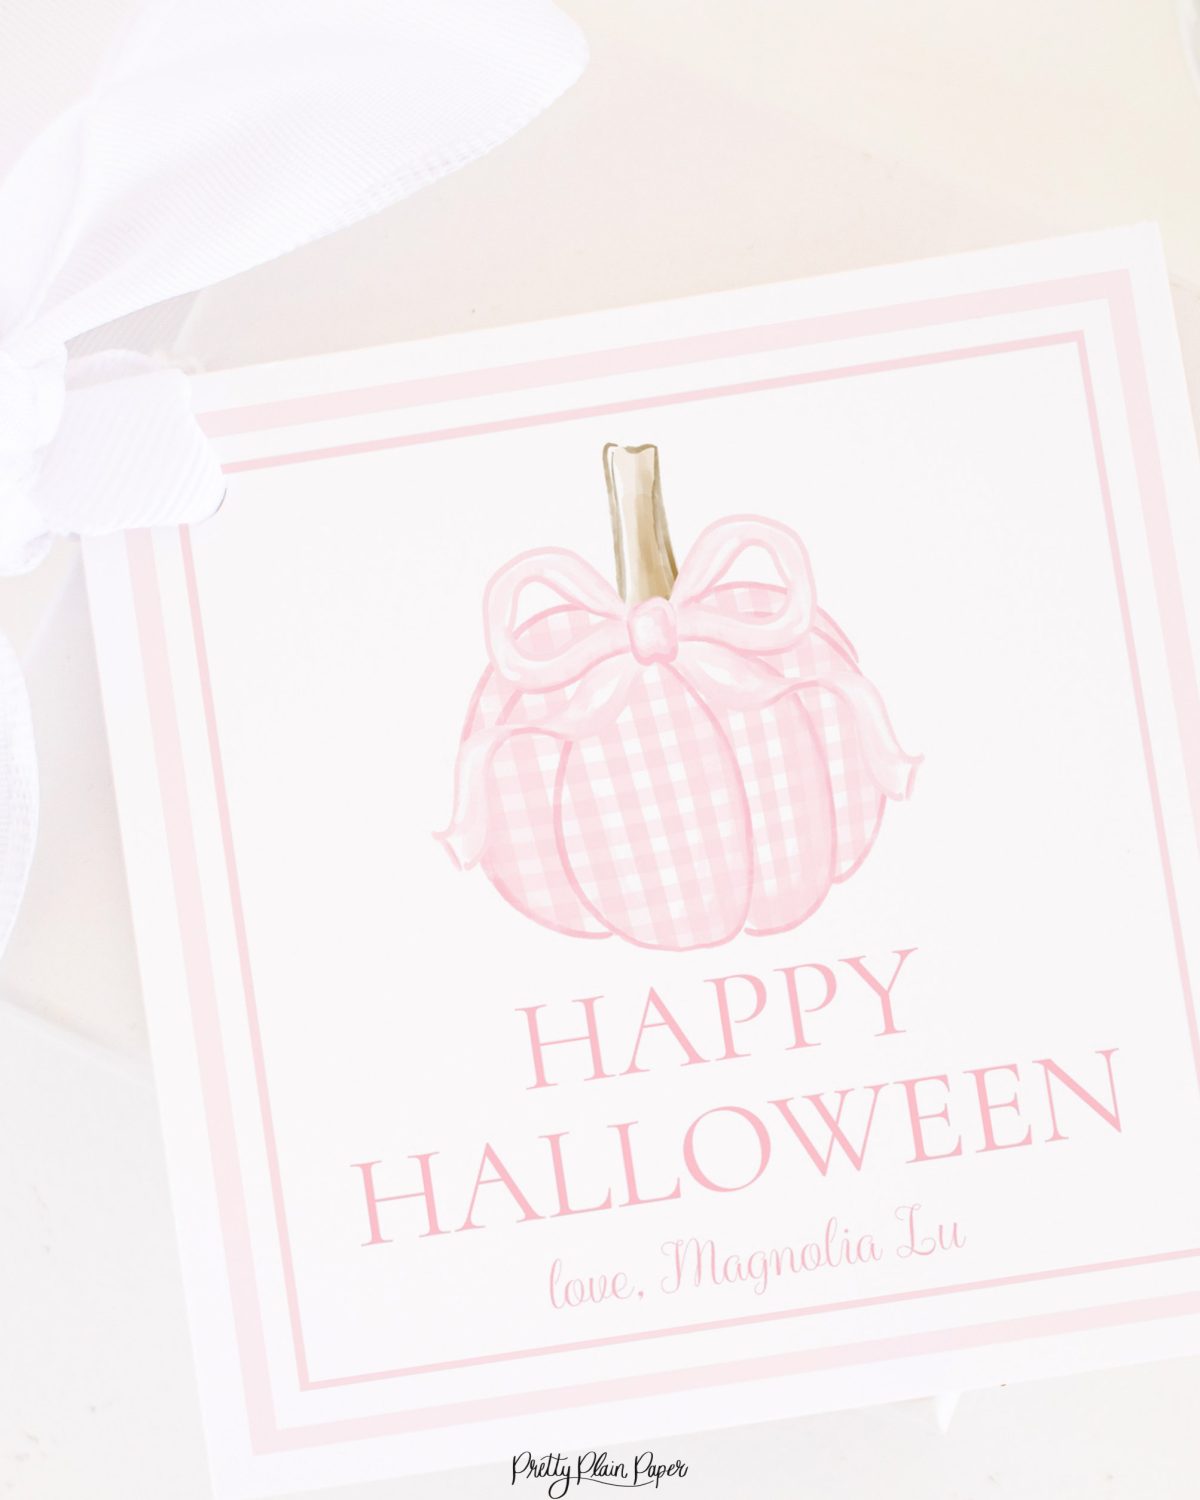 Pink Gingham Pumpkin with Bow Halloween Treat Tag by Pretty Plain Paper for School or Classroom Halloween Treat Bag Tags or Gifts